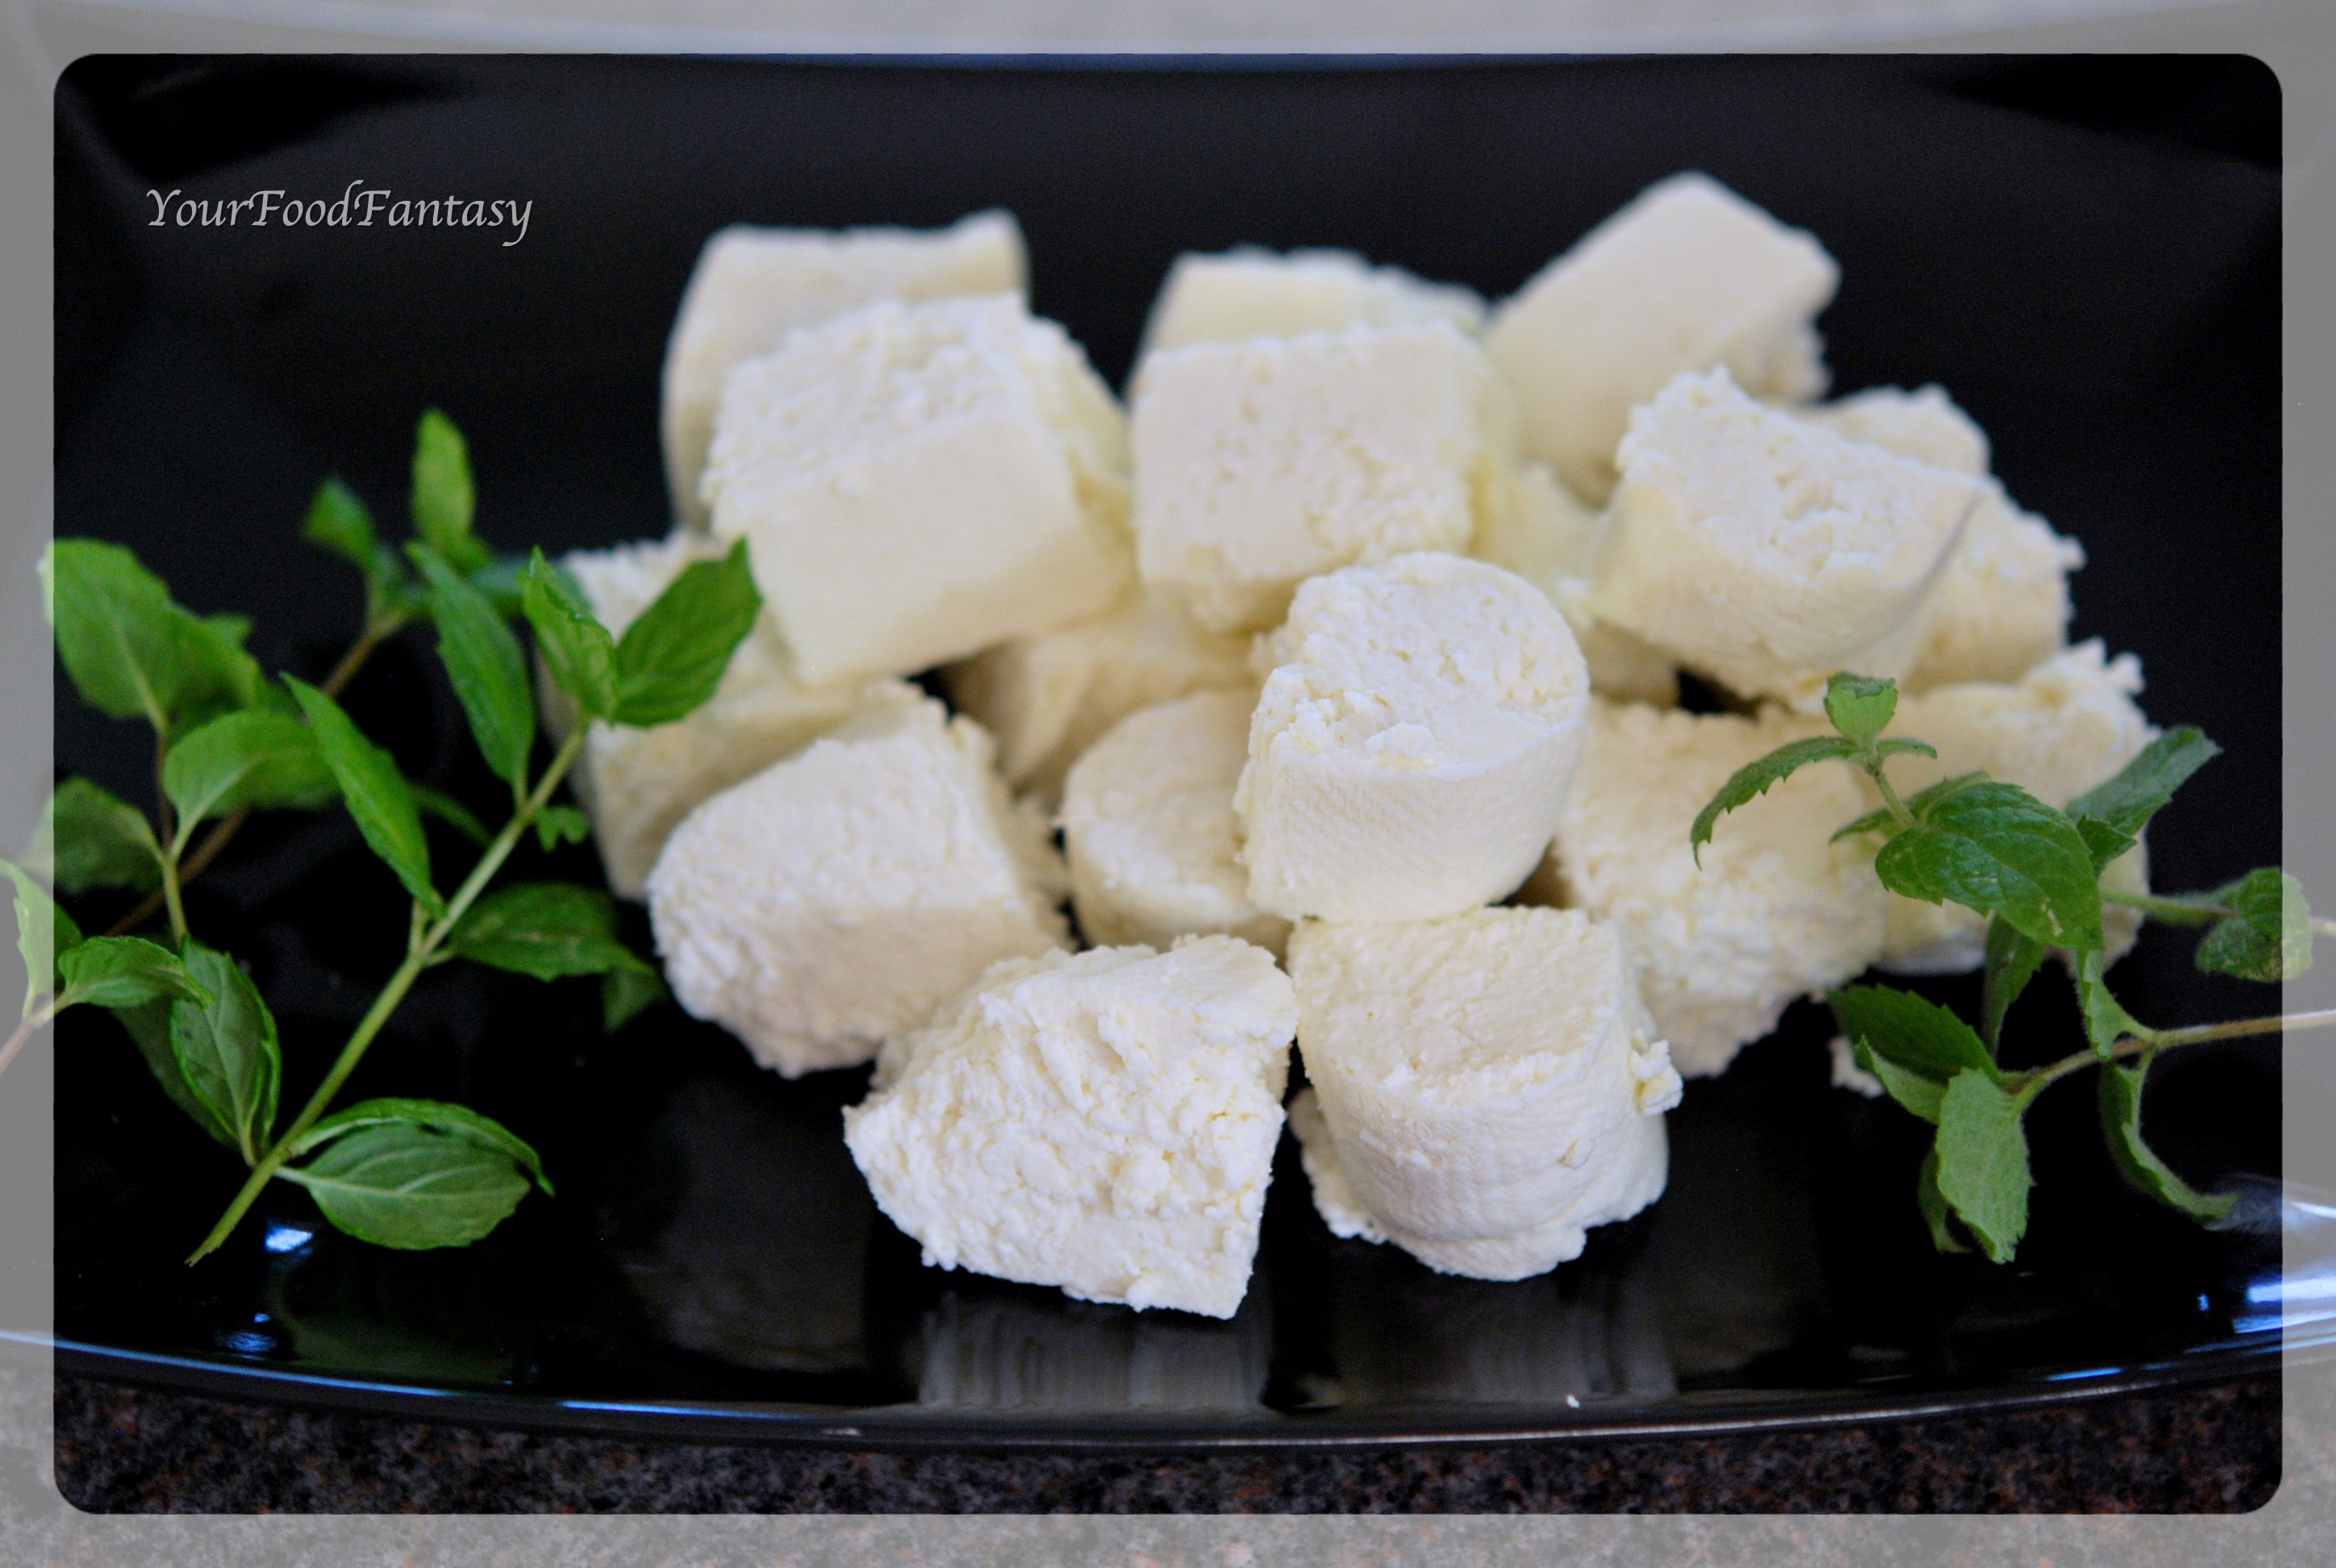 How to make paneer at home step by step recipe | Your Food Fantasy